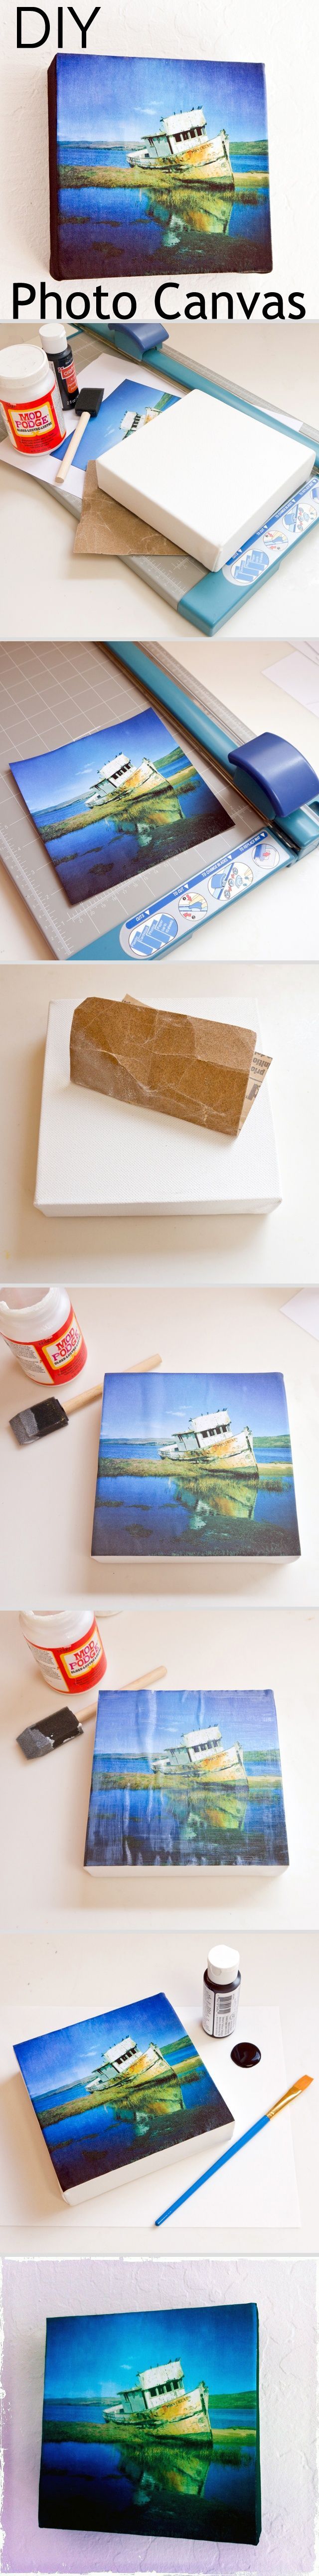 Make your own photo canvas